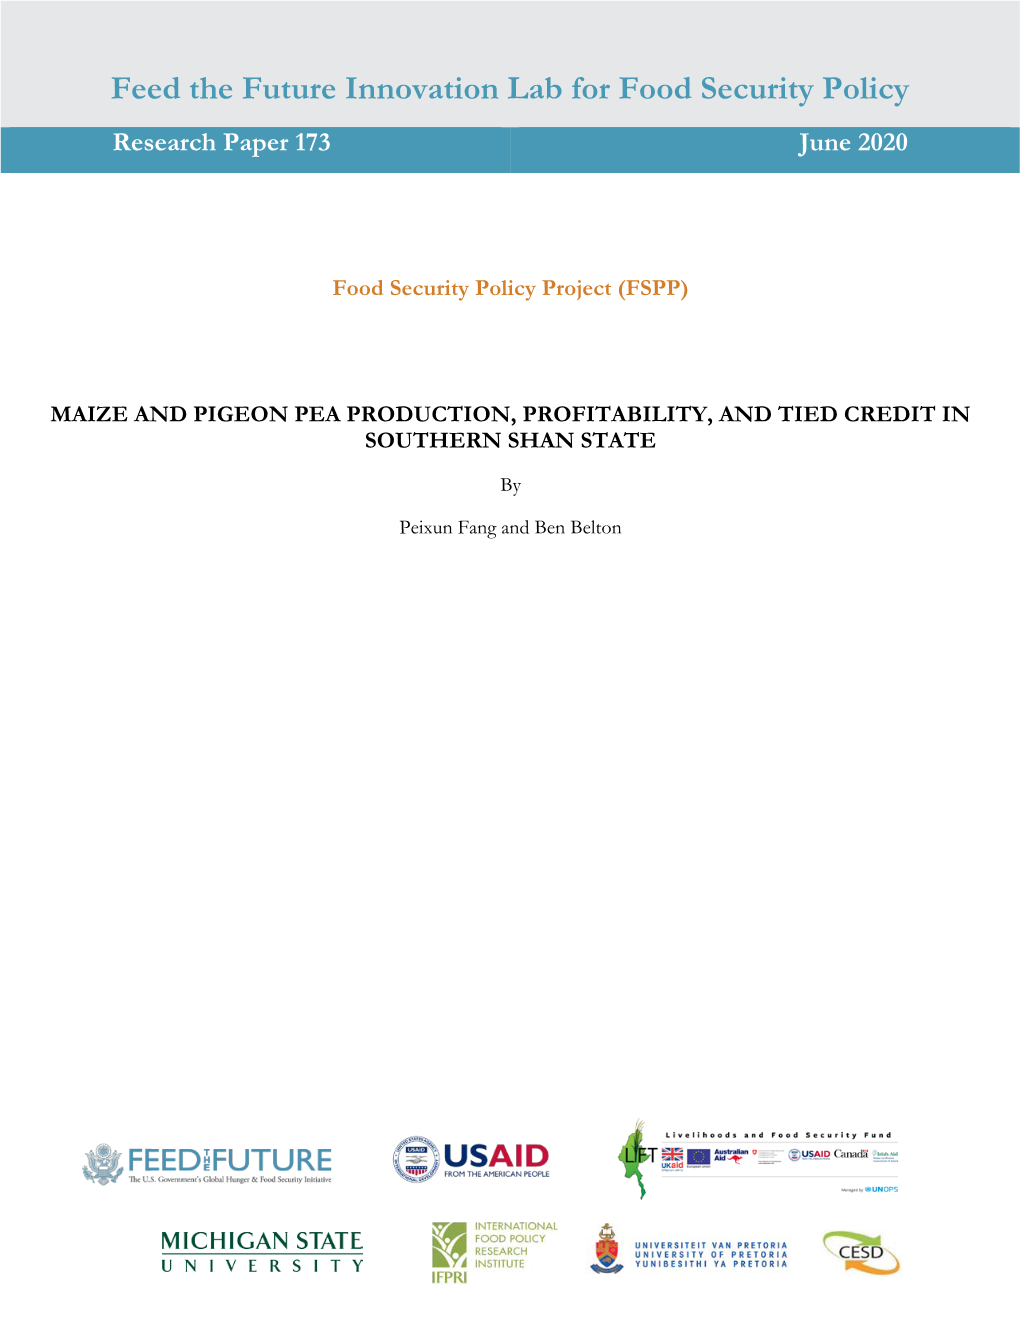 Maize and Pigeon Pea Production, Profitability, and Tied Credit in Southern Shan State